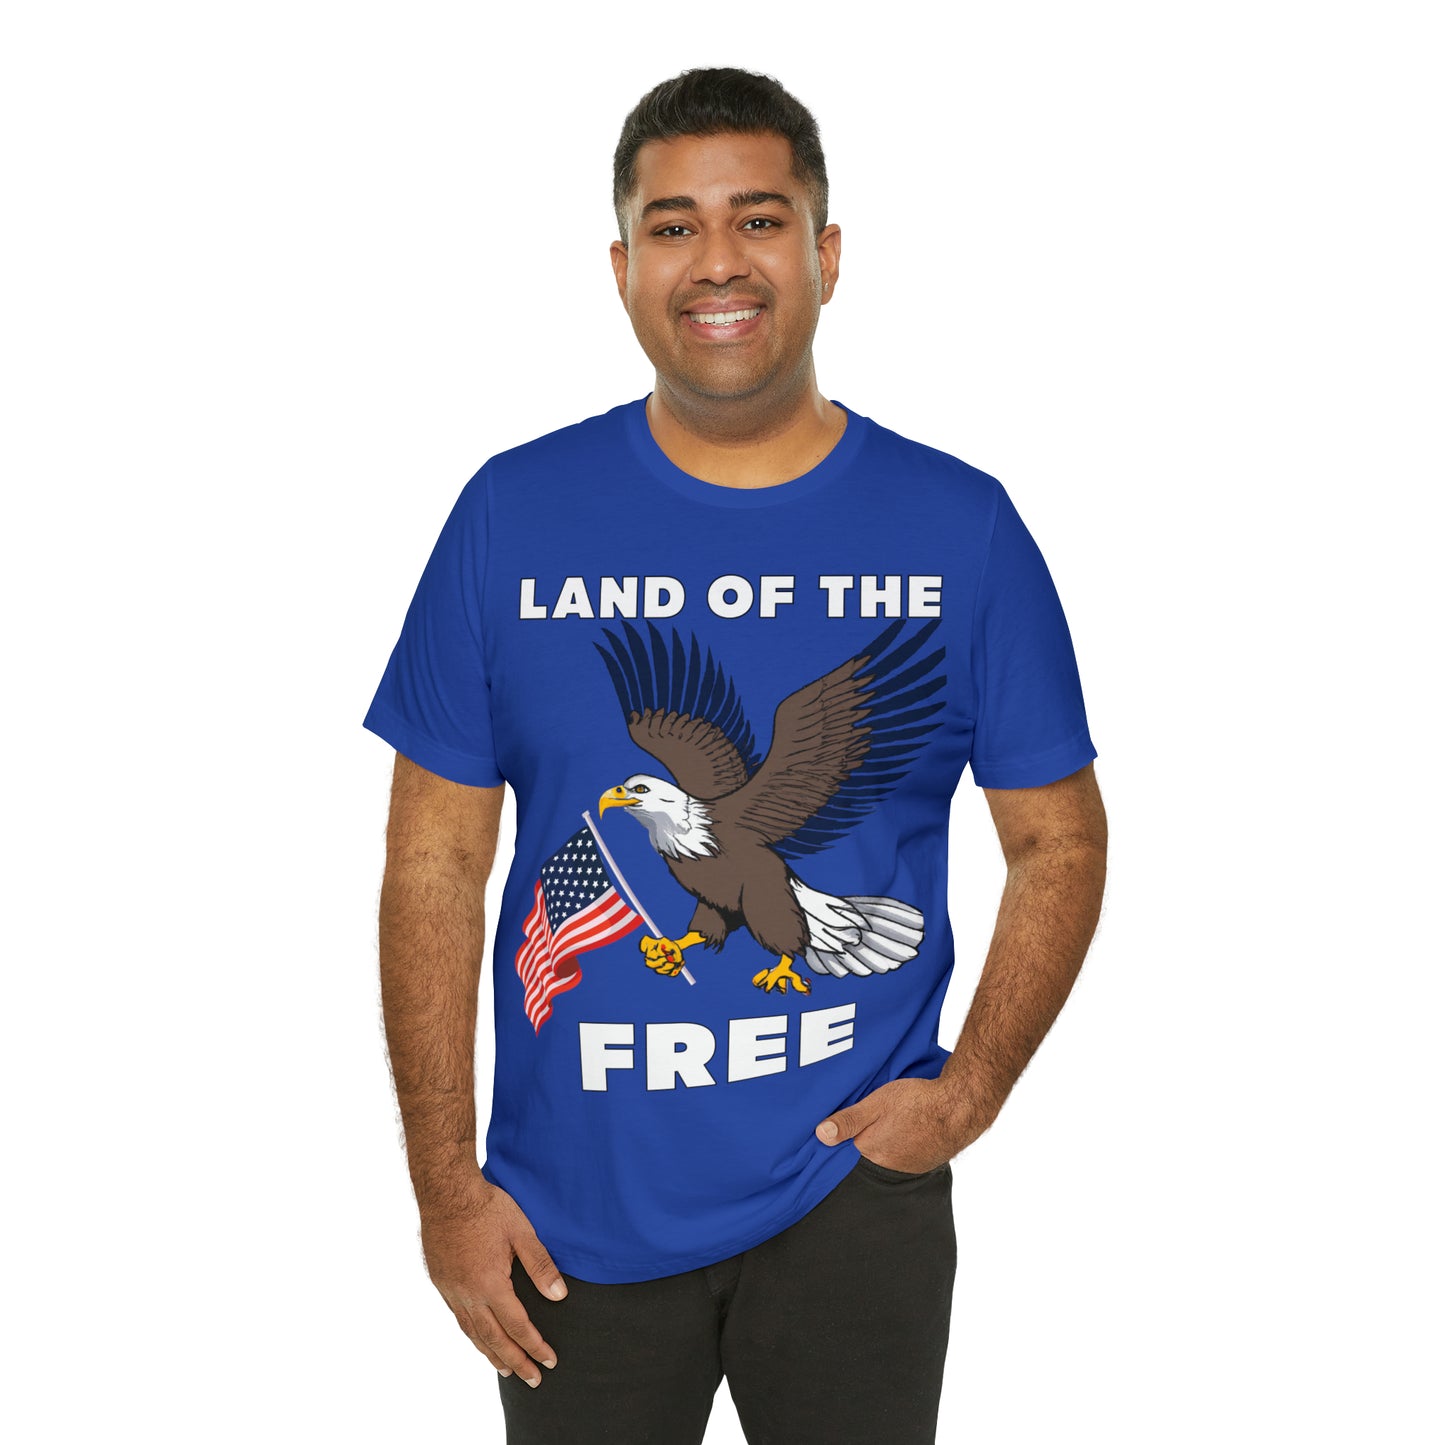 "Land of the Free, Home of the Brave: Celebrate Independence Day with Patriotic Shirts, Flag shirt - Freedom, Fireworks, and More